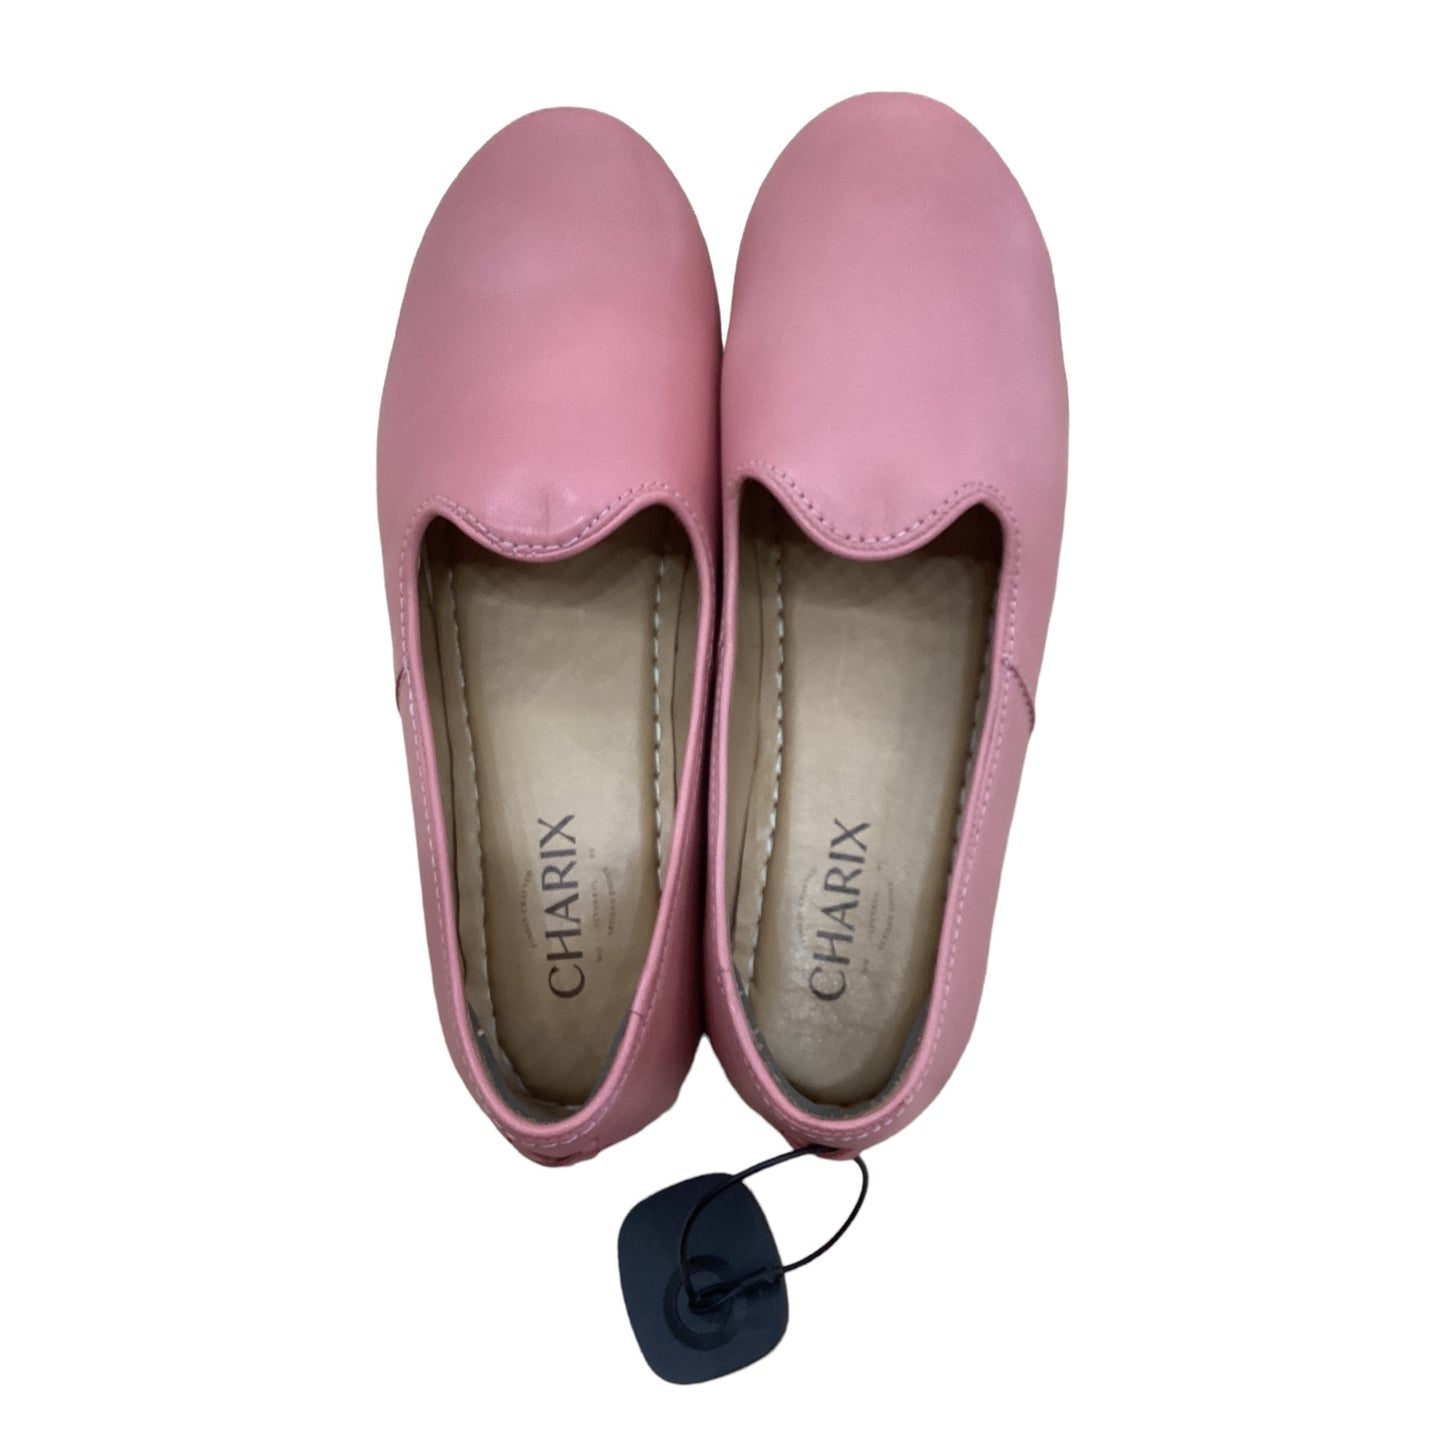 Shoes Flats By Charix  Size: 10.5